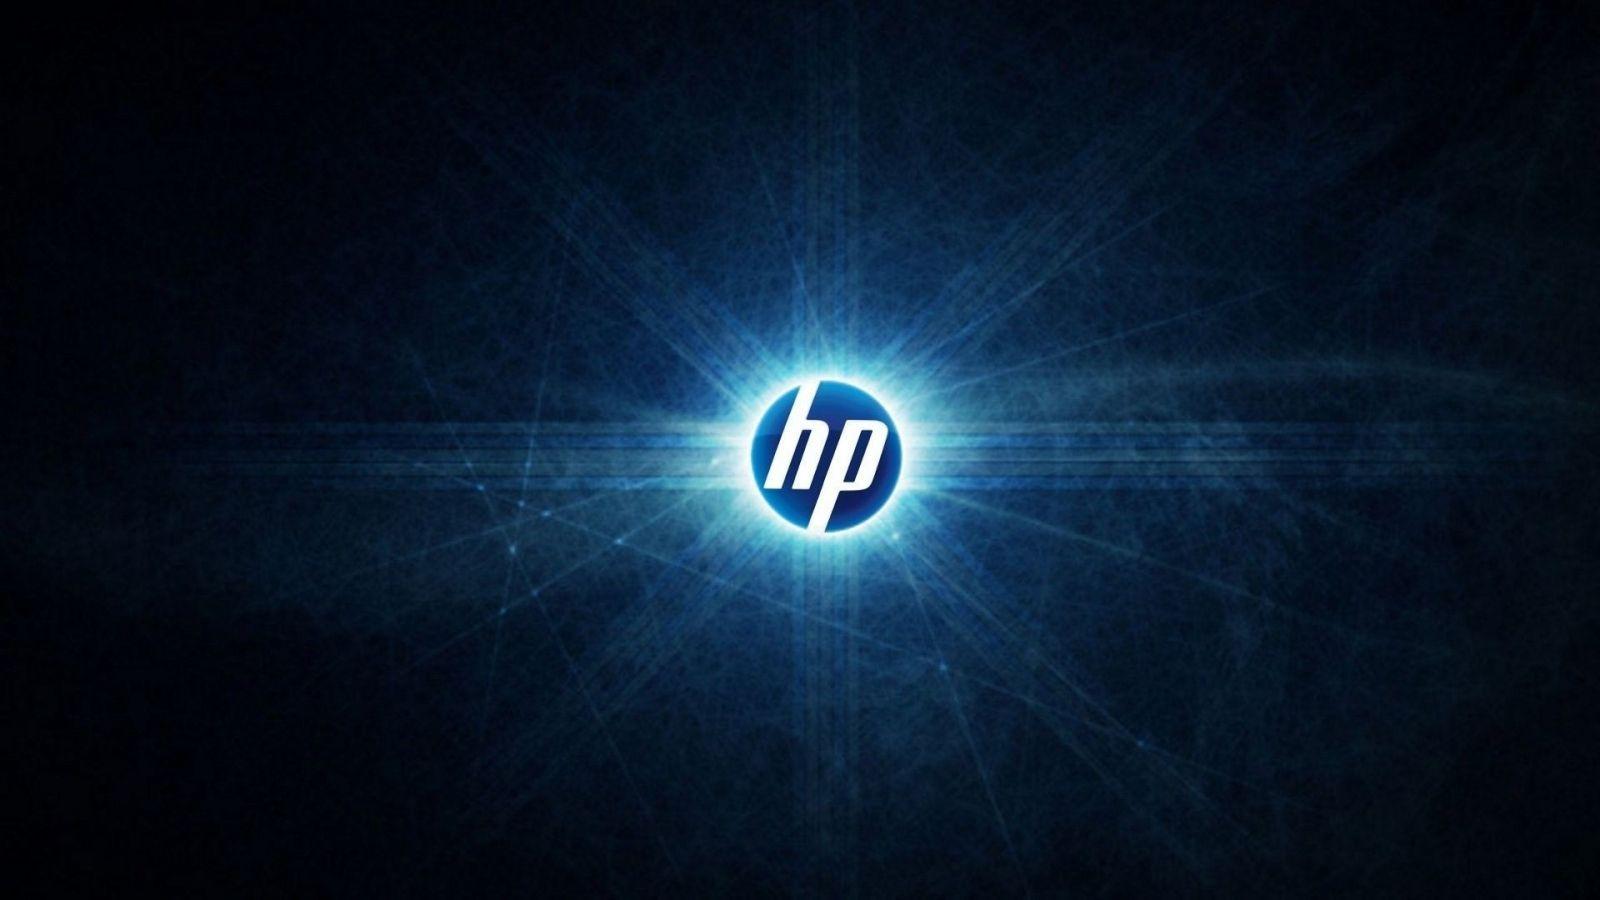 Hp Computer Wallpapers Top Free Hp Computer Backgrounds Wallpaperaccess